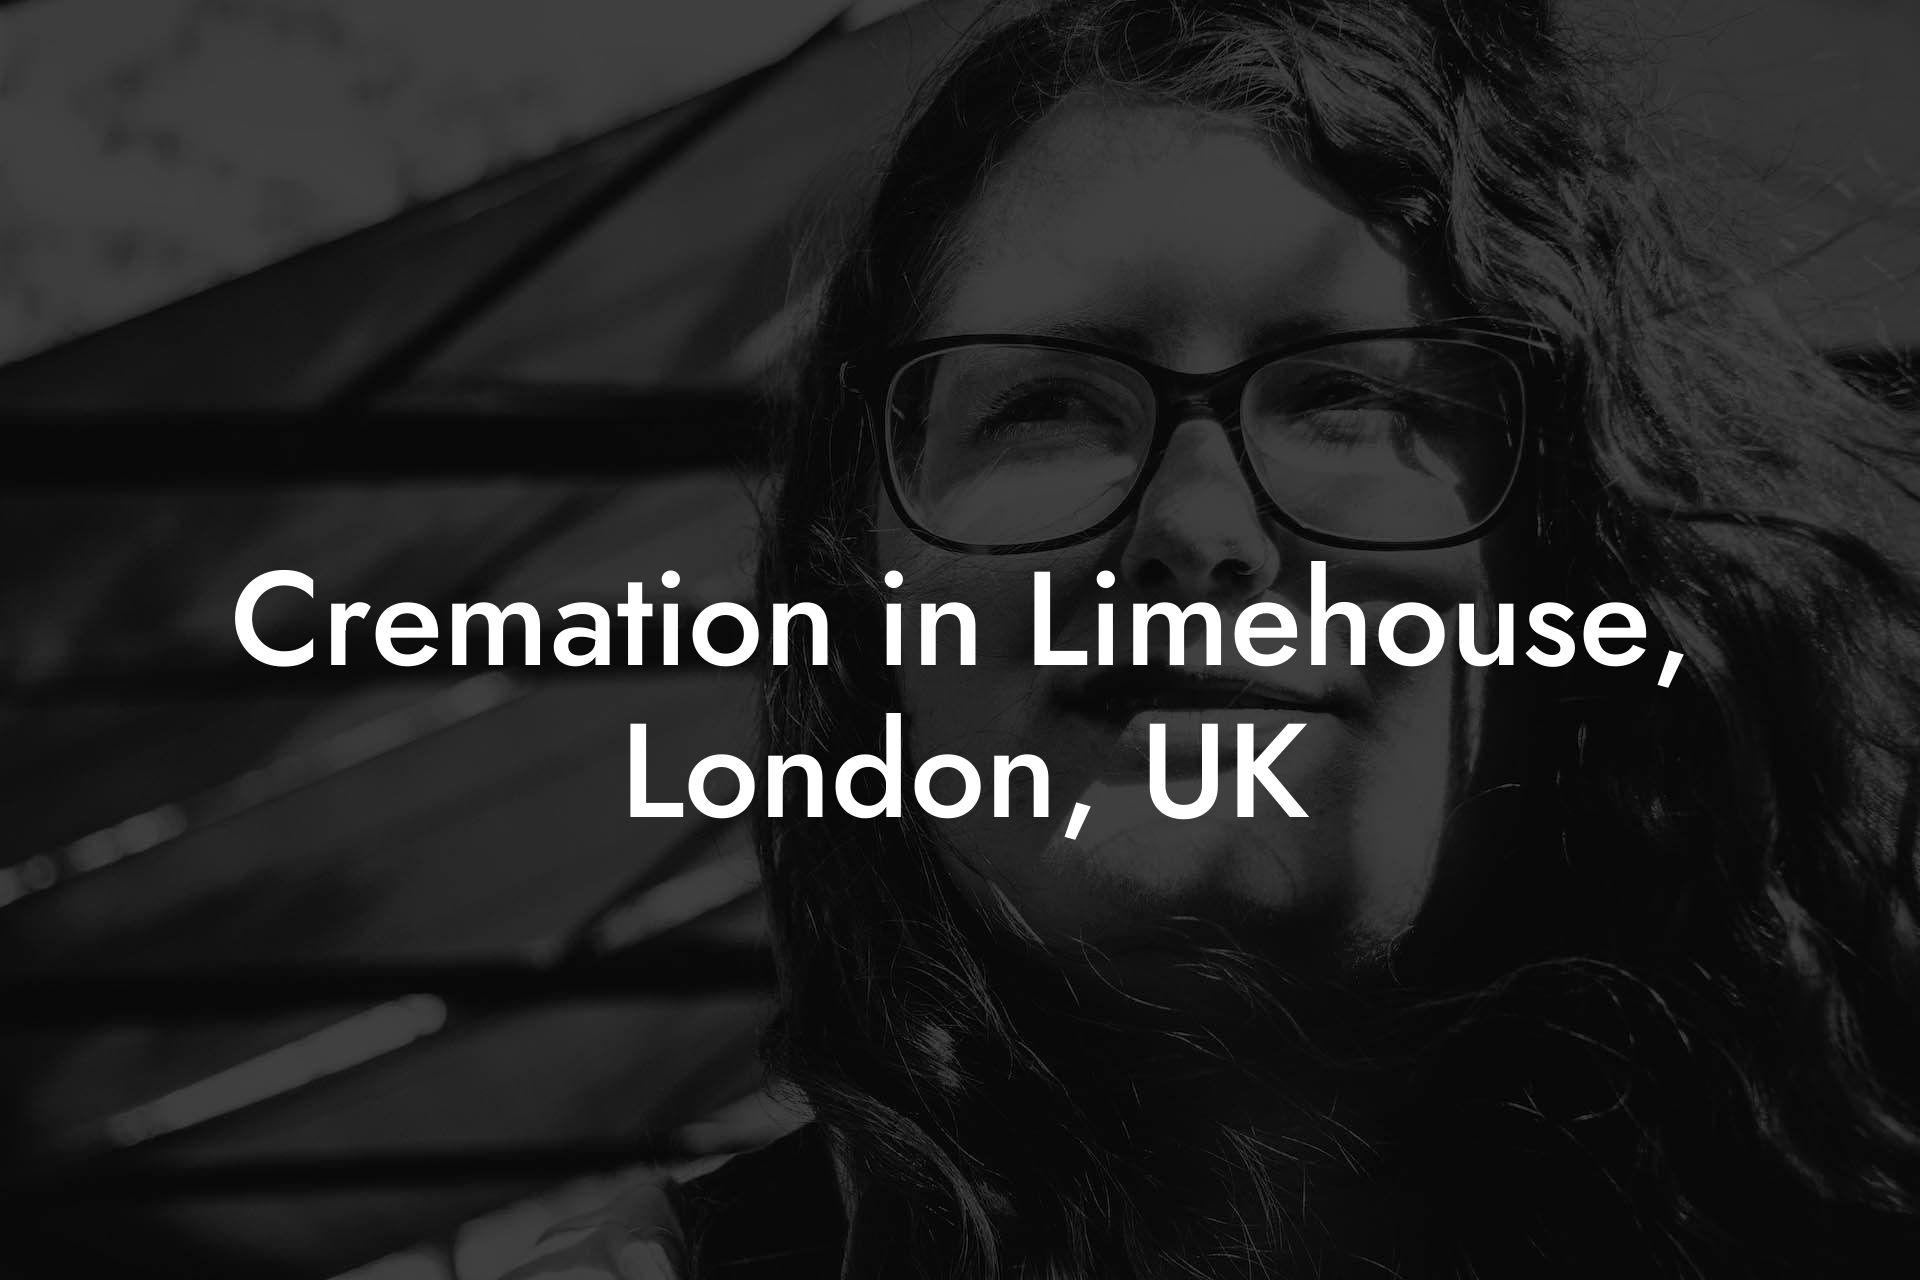 Cremation in Limehouse, London, UK